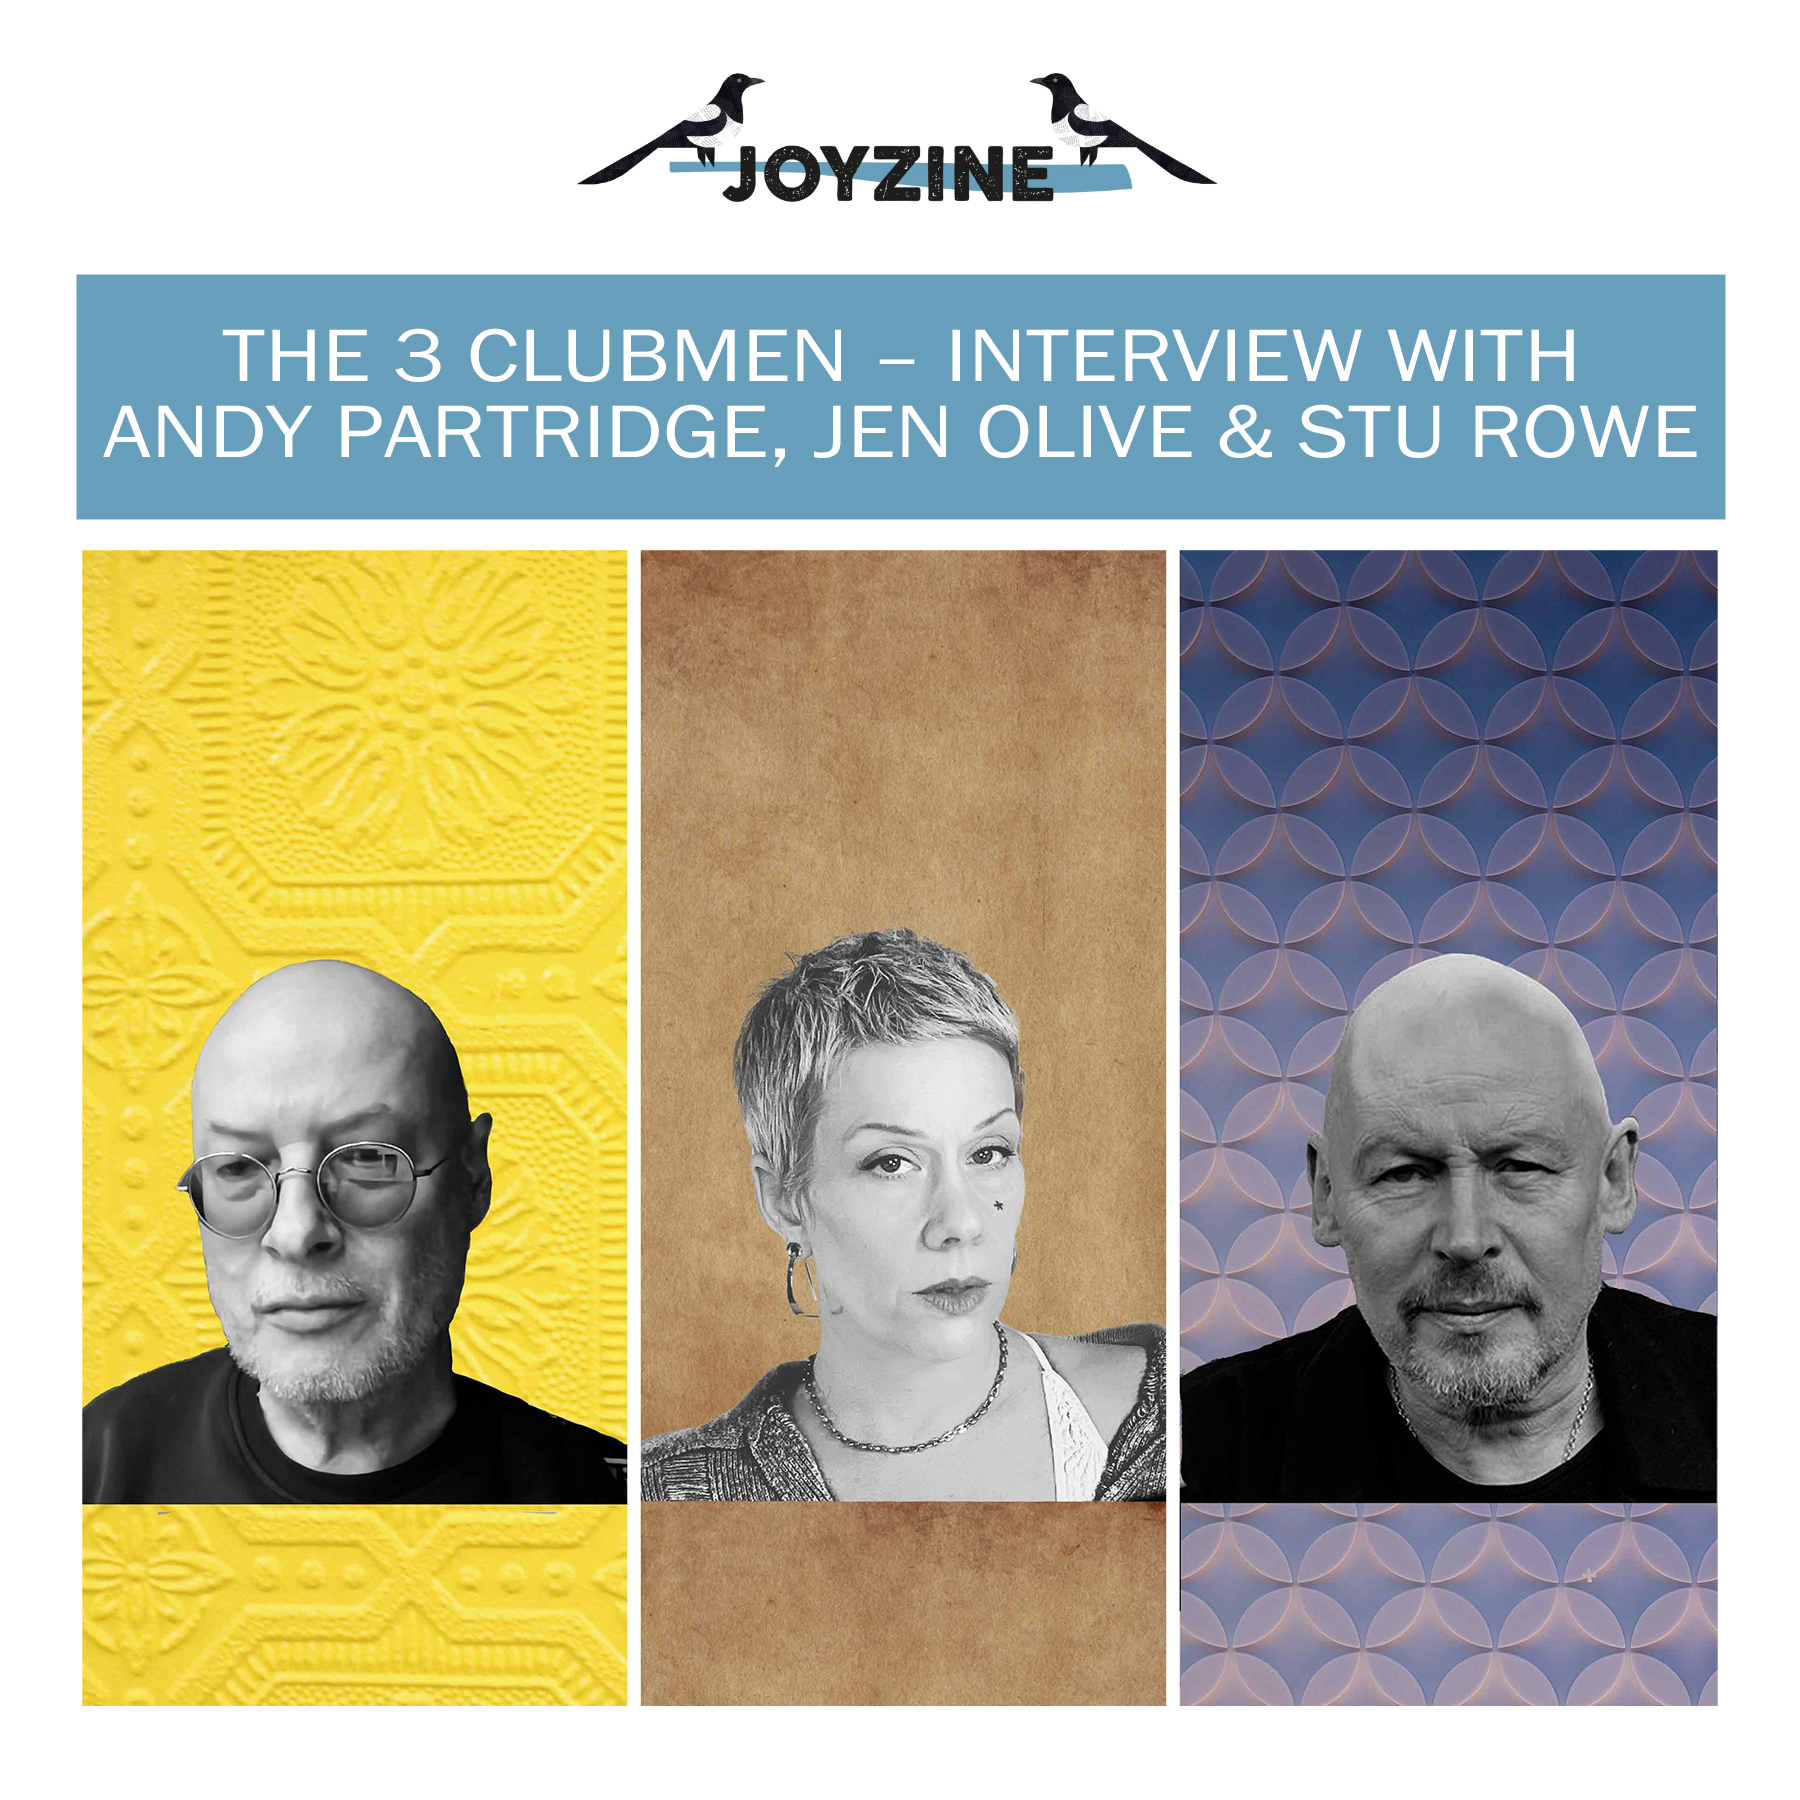 THE 3 CLUBMEN – INTERVIEW WITH ANDY PARTRIDGE, JEN OLIVE & STU ROWE